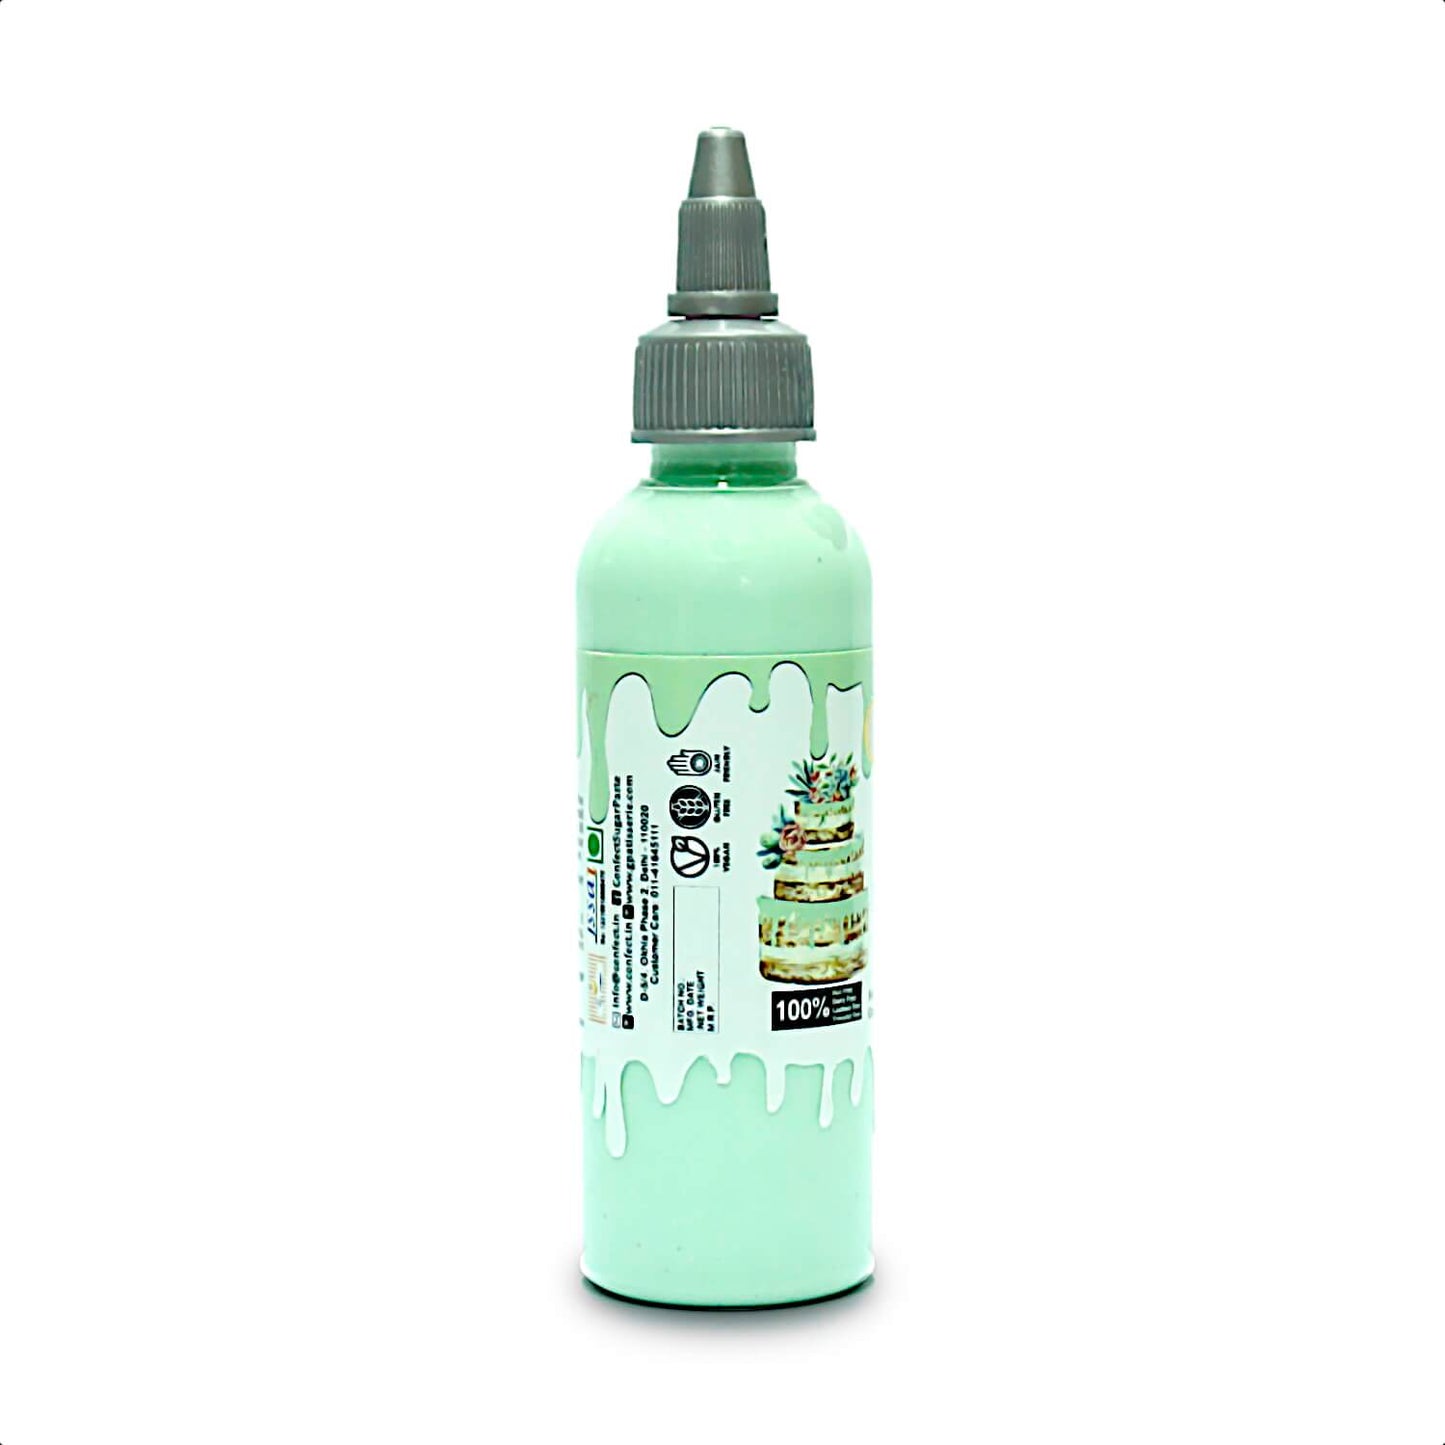 Confect Mint Green Drips 110 Gms